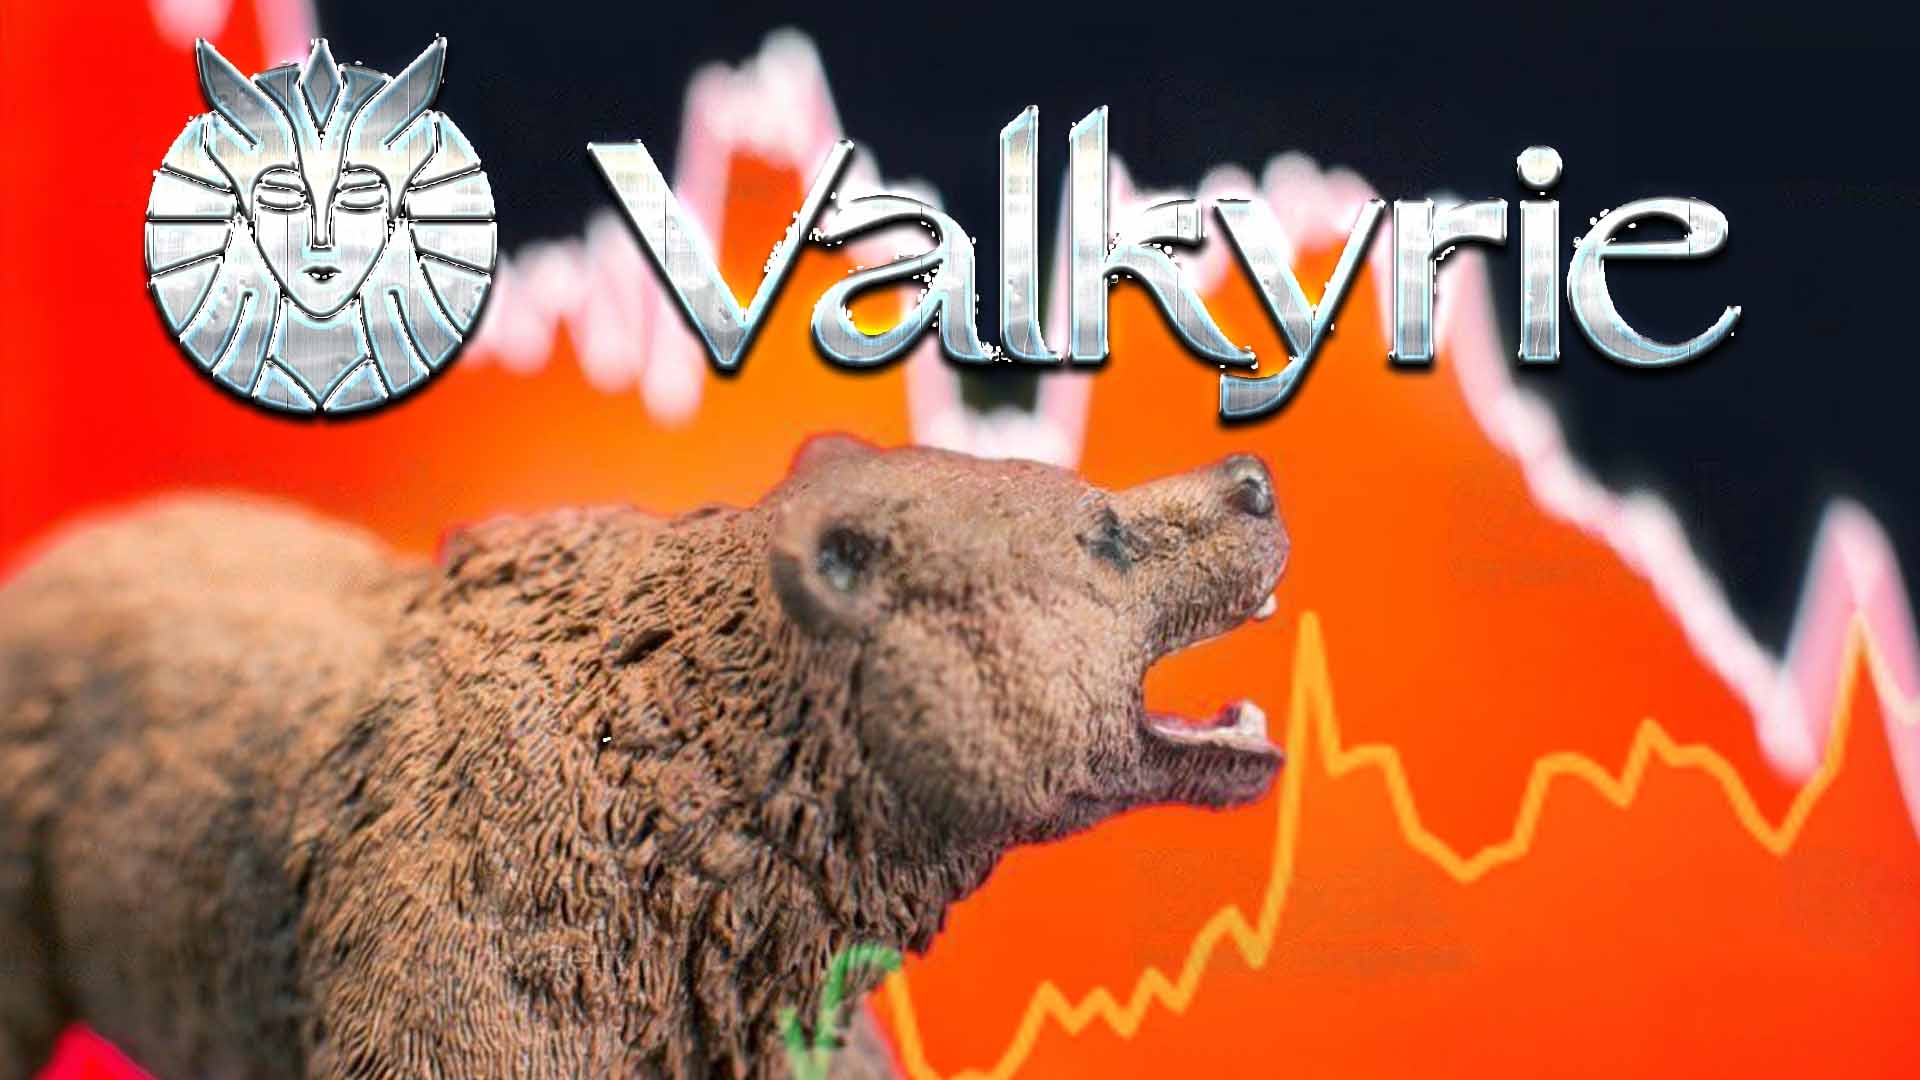 Valkyrie crypto trust collects almost 74 million in funding amidst a volatile market.